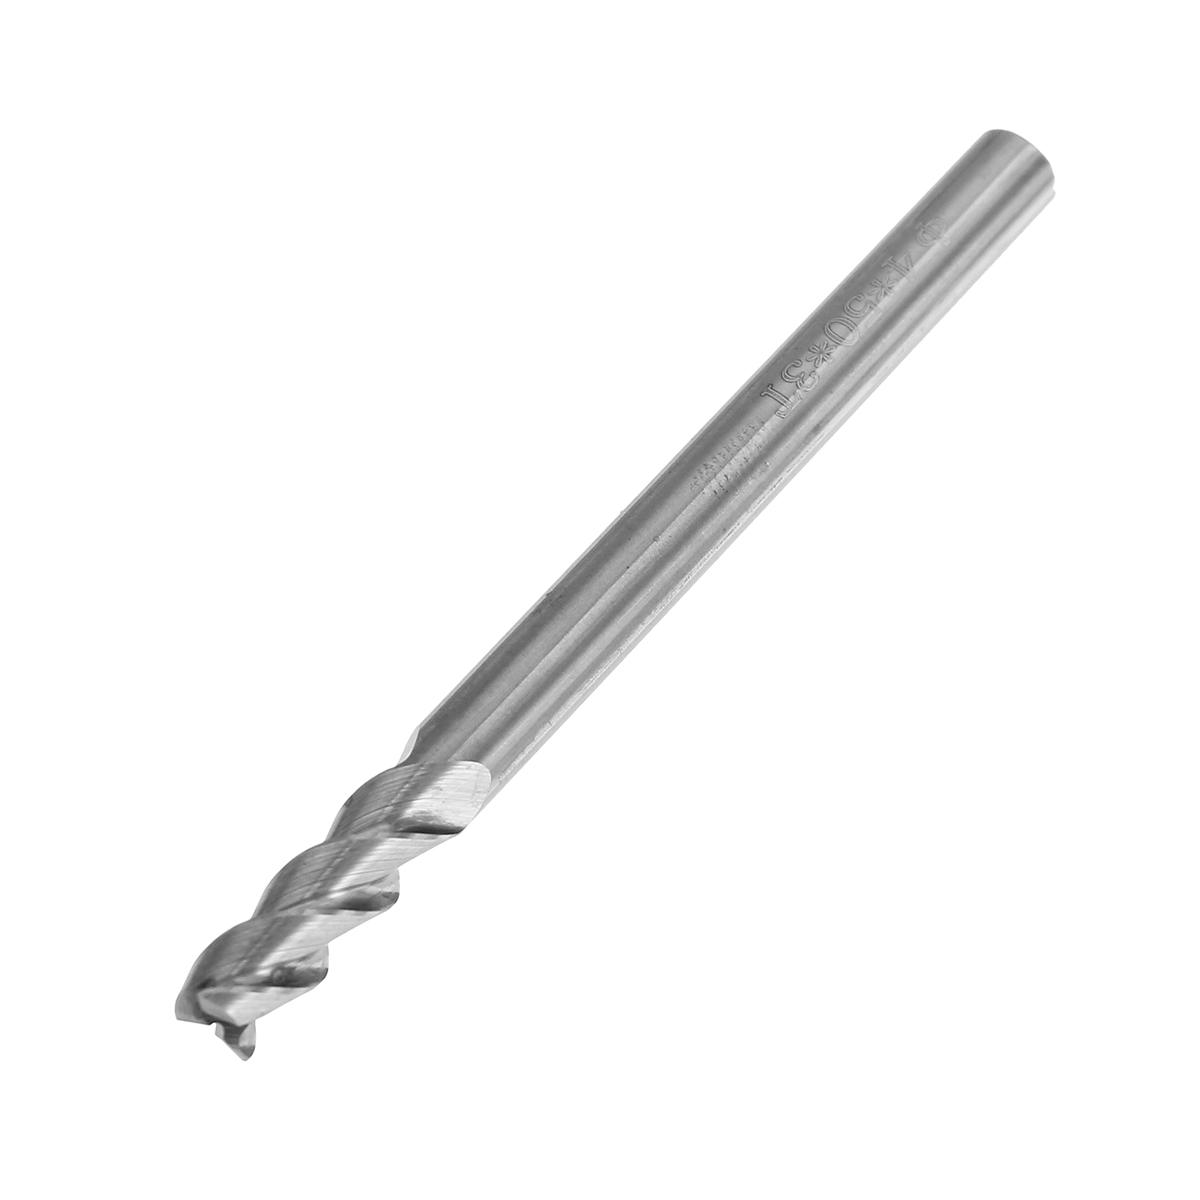 Drillpro 1-4mm 3 Flutes End Mill Cutter 1/1.5/2/2.5/3/4mm HRC55 Tungsten Carbide CNC Milling Tool for Aluminum